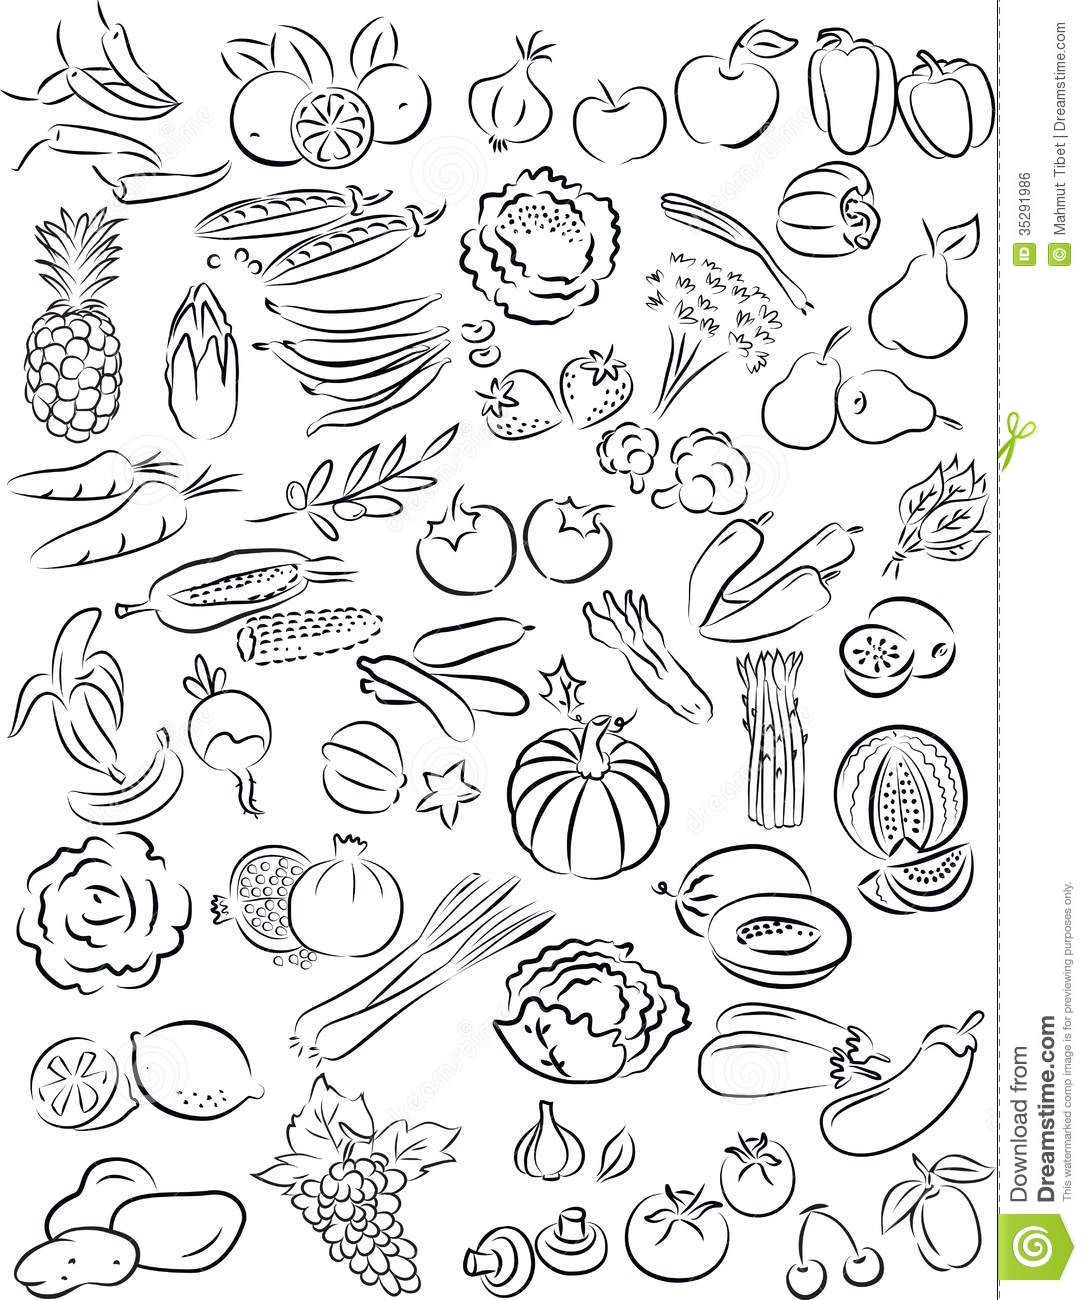 Vegetable Clipart Black And White Vegetables And Fruits.